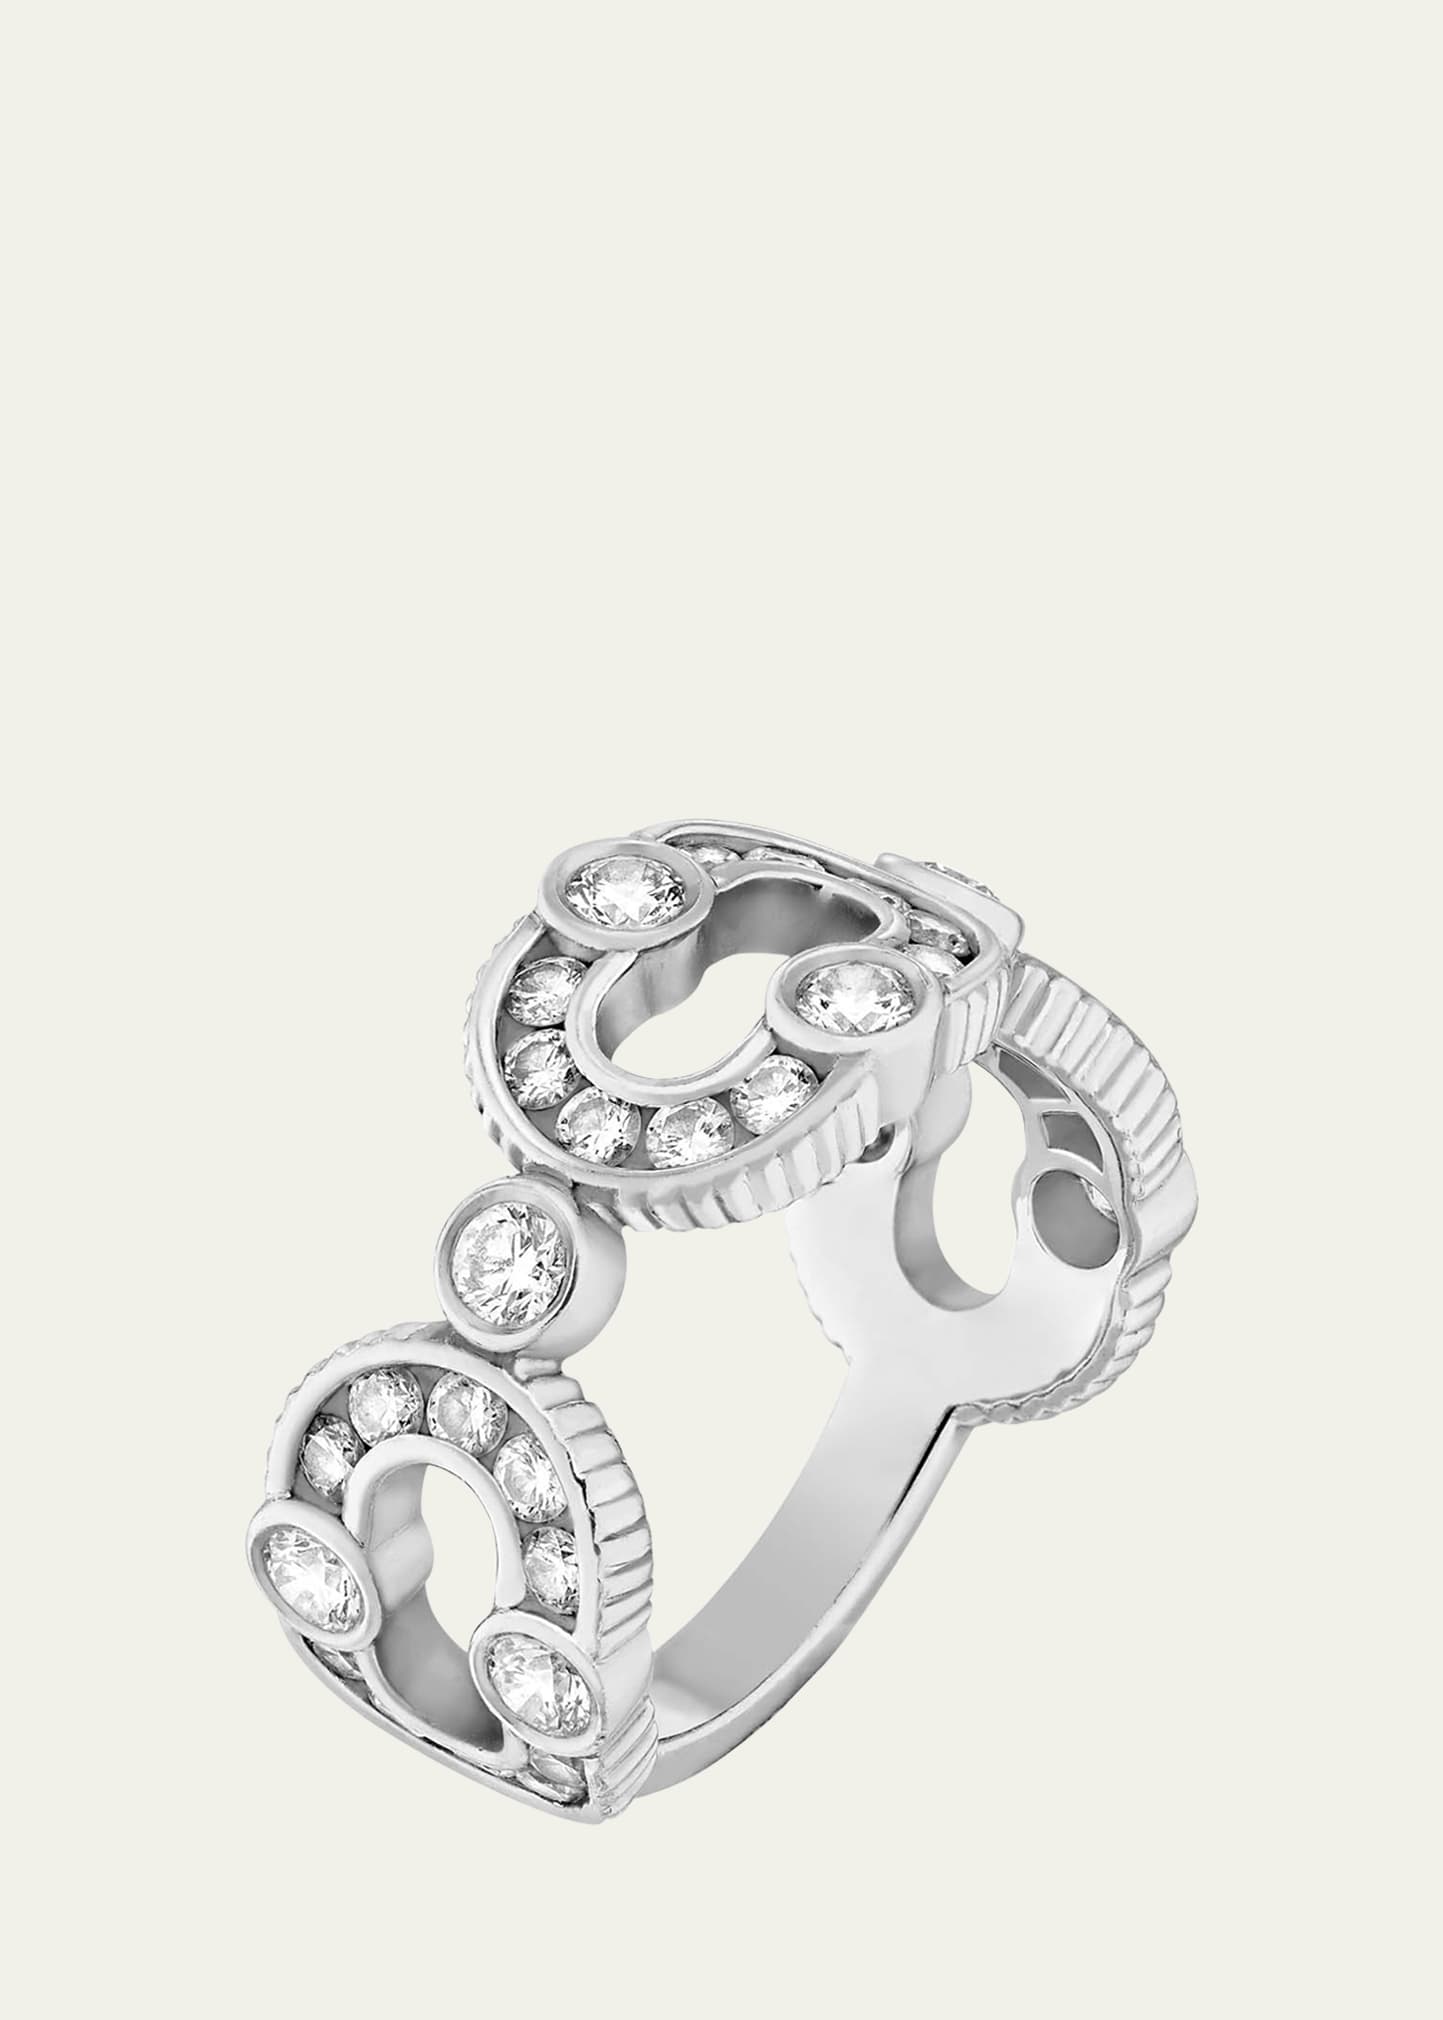 Magnetic Enchainee Diamond Ring in White Gold